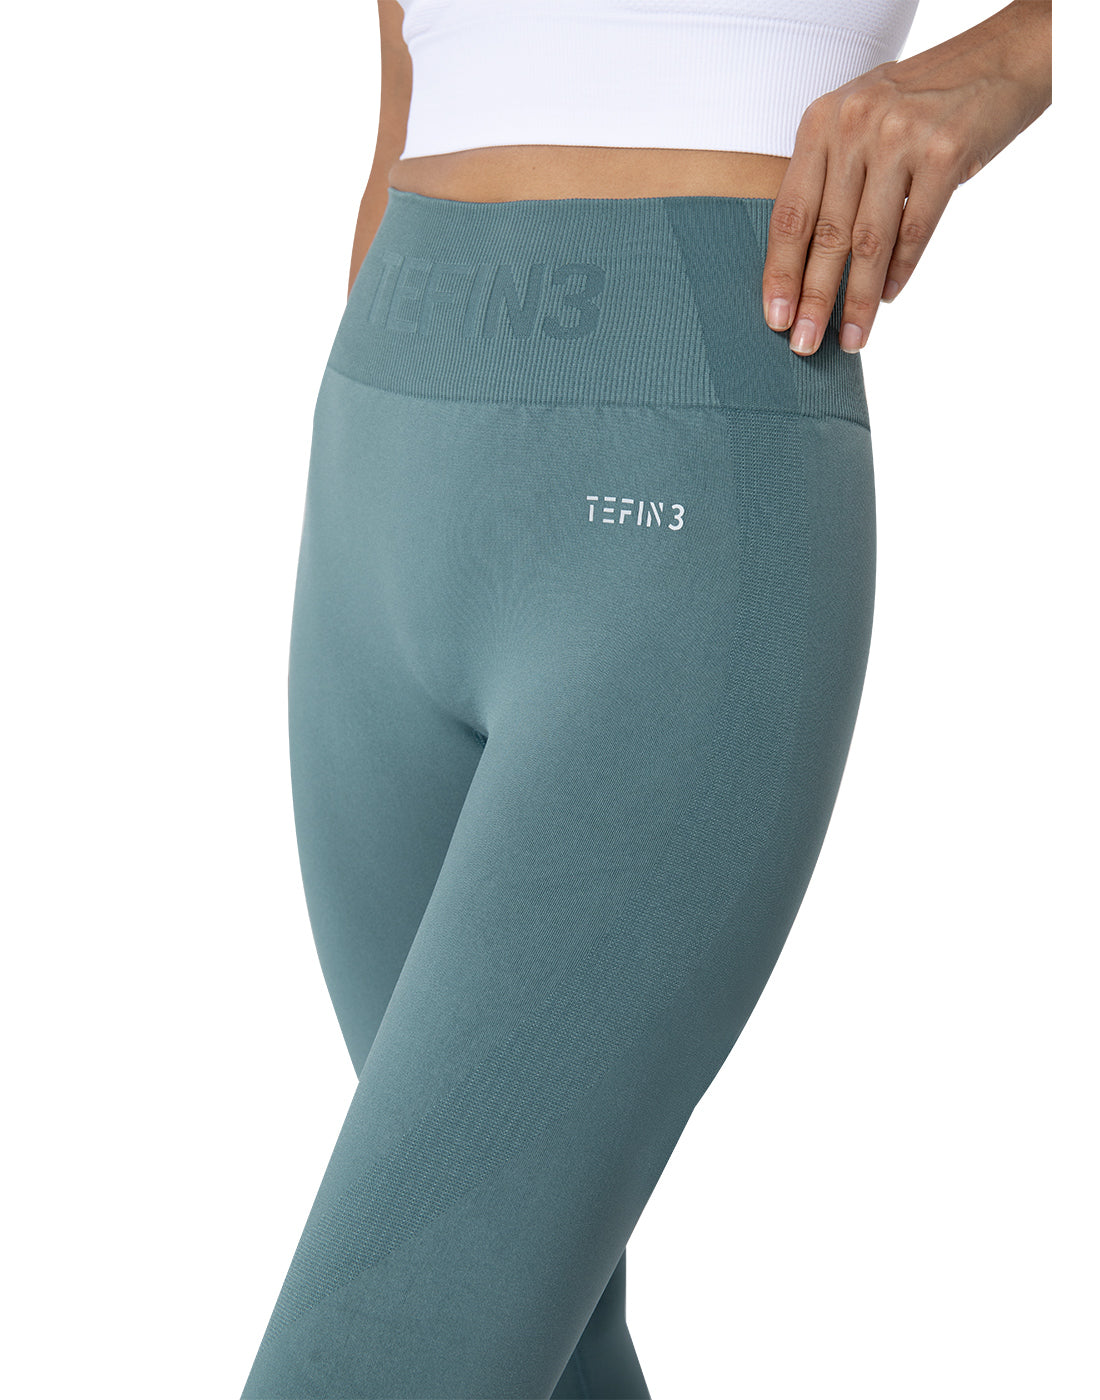 Why are seamless leggings good?